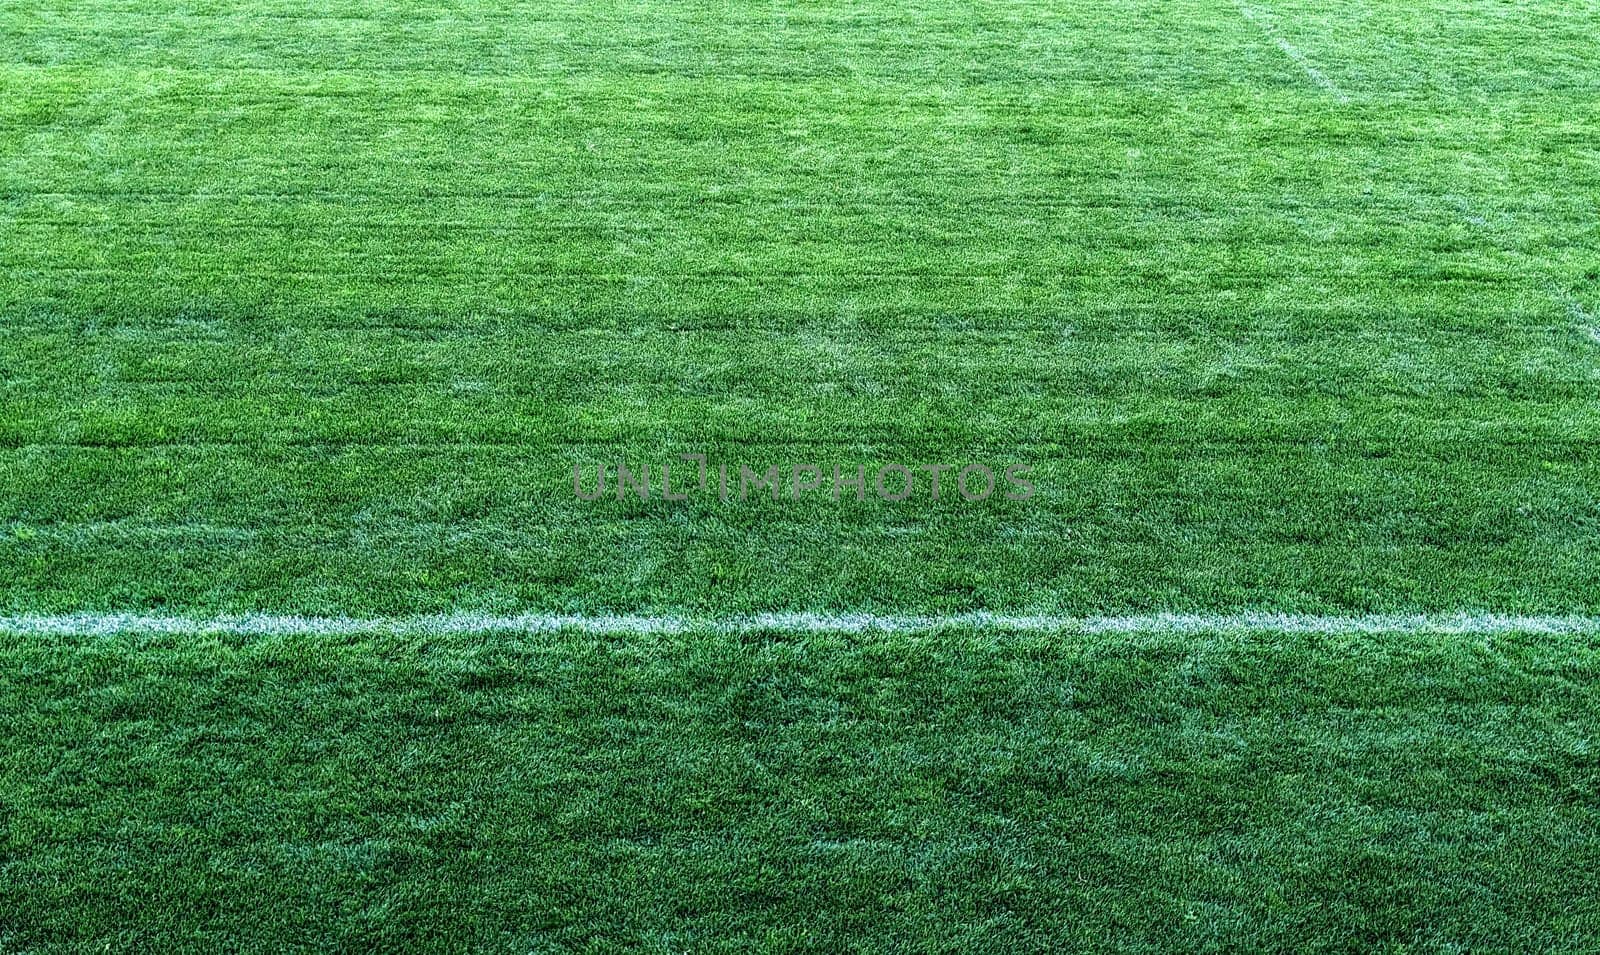 Green grass texture of a soccer or rugby field. Lush green grass meadow background